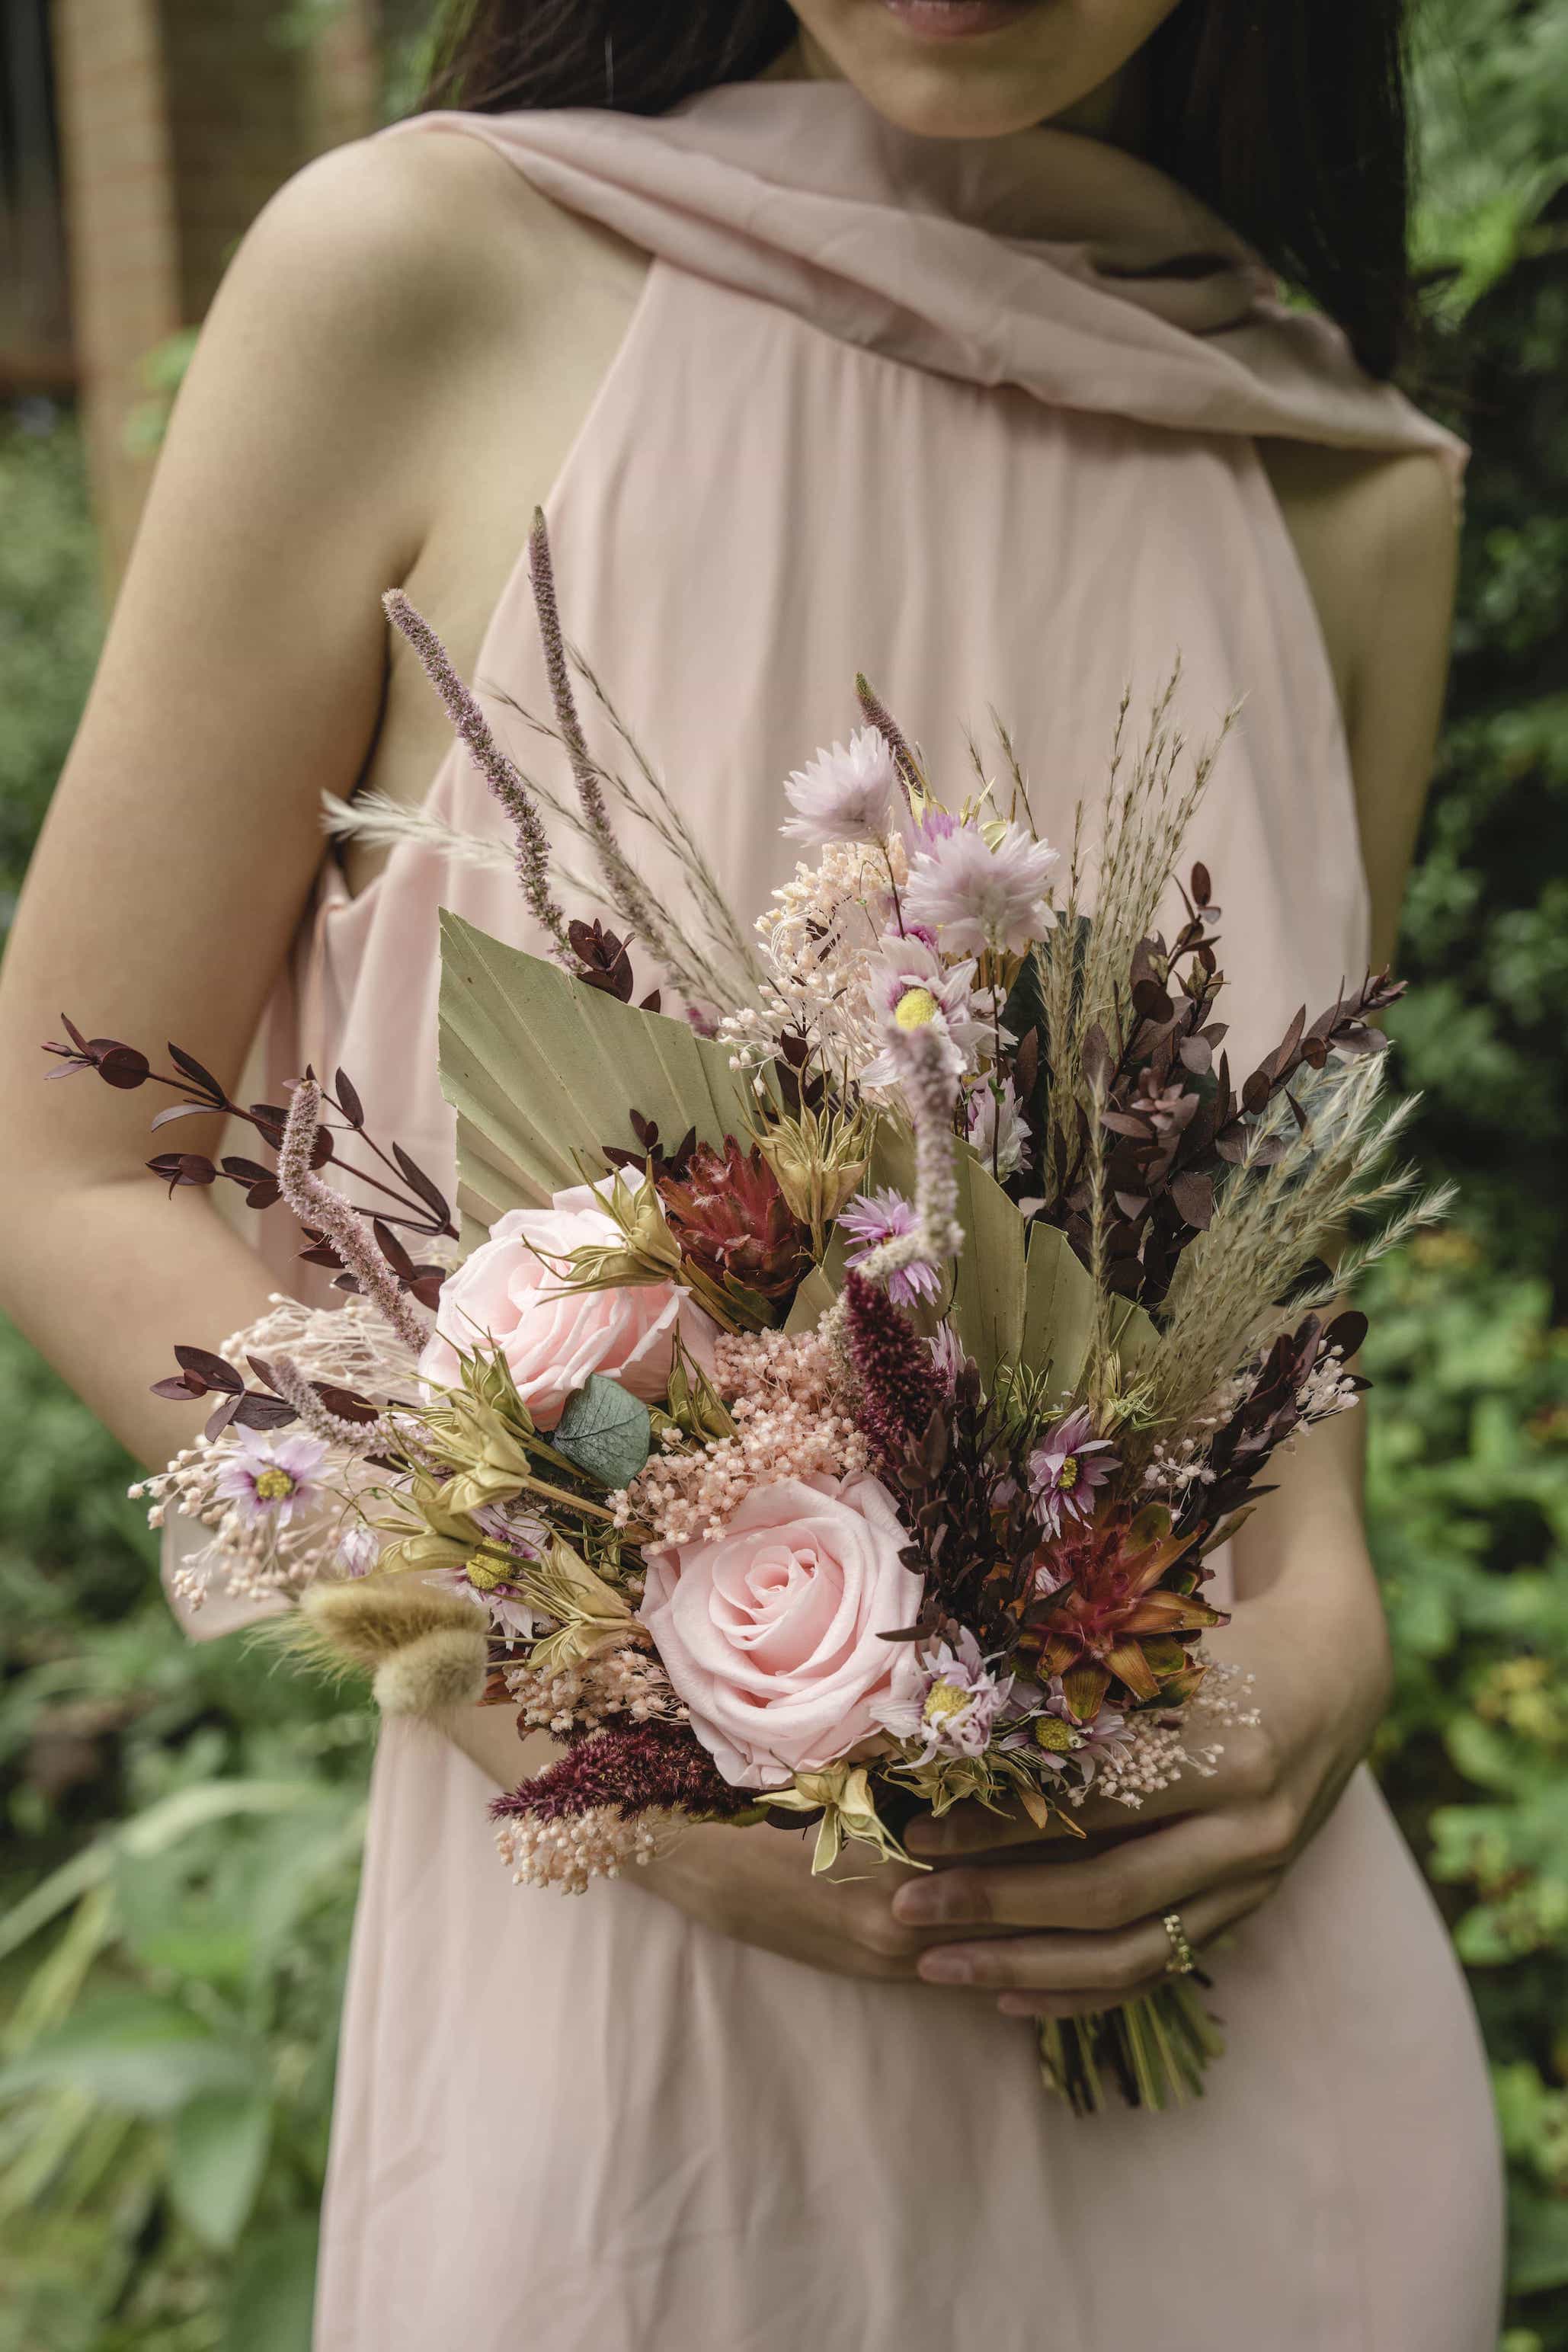 Vintage Wedding Flowers: Choose Now for Next Year